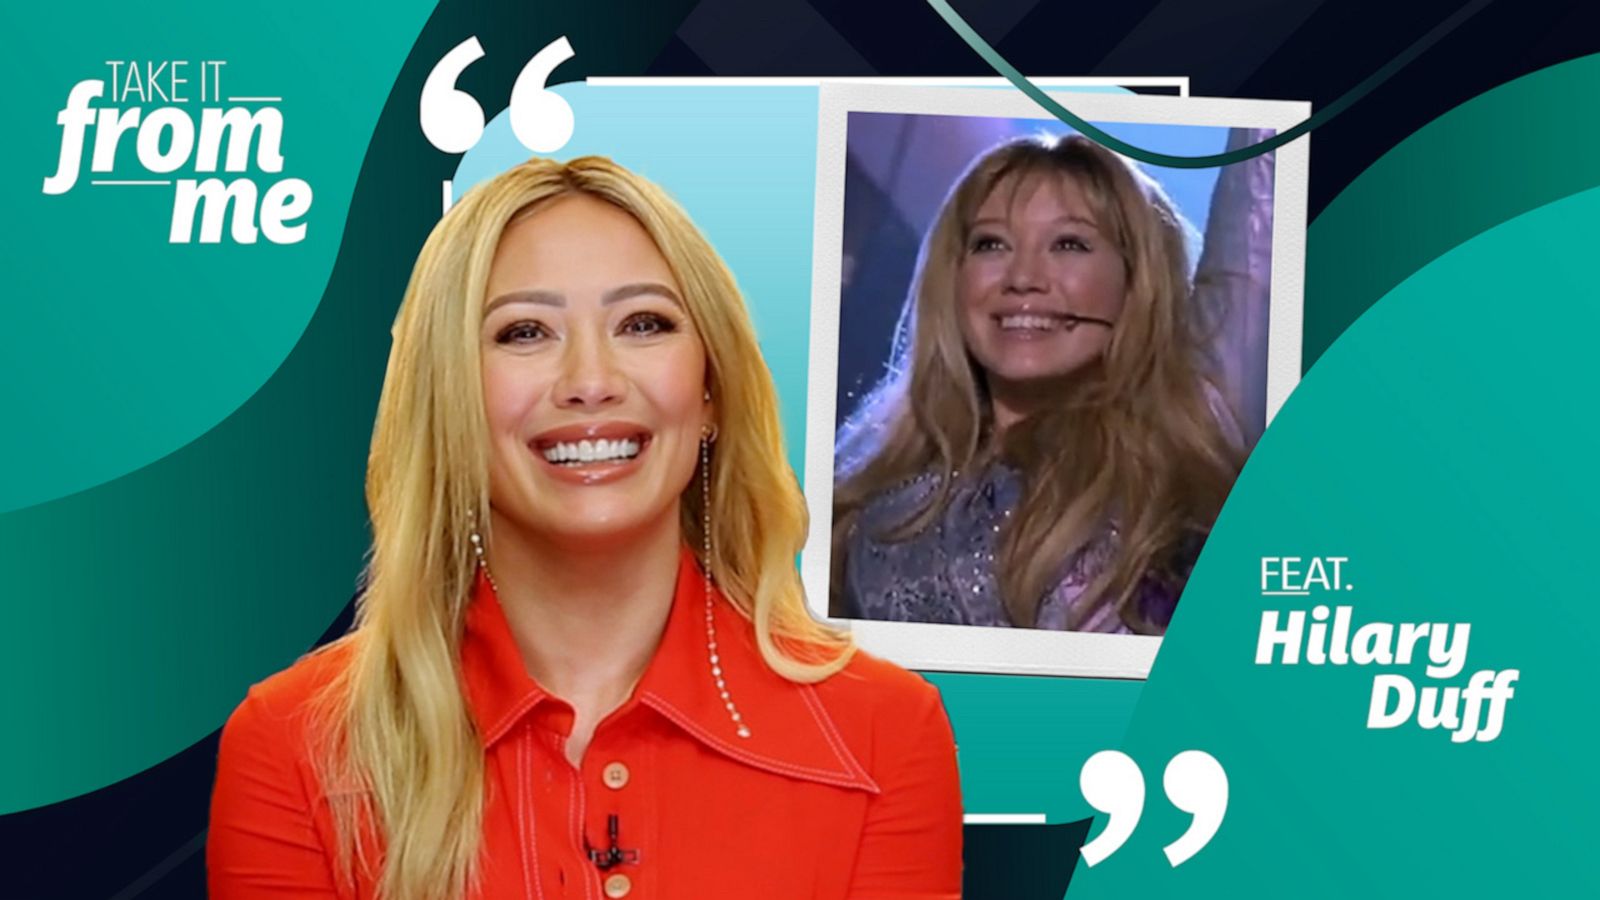 VIDEO: 'Hey now': Hilary Duff reacts to some of her most iconic on screen moments